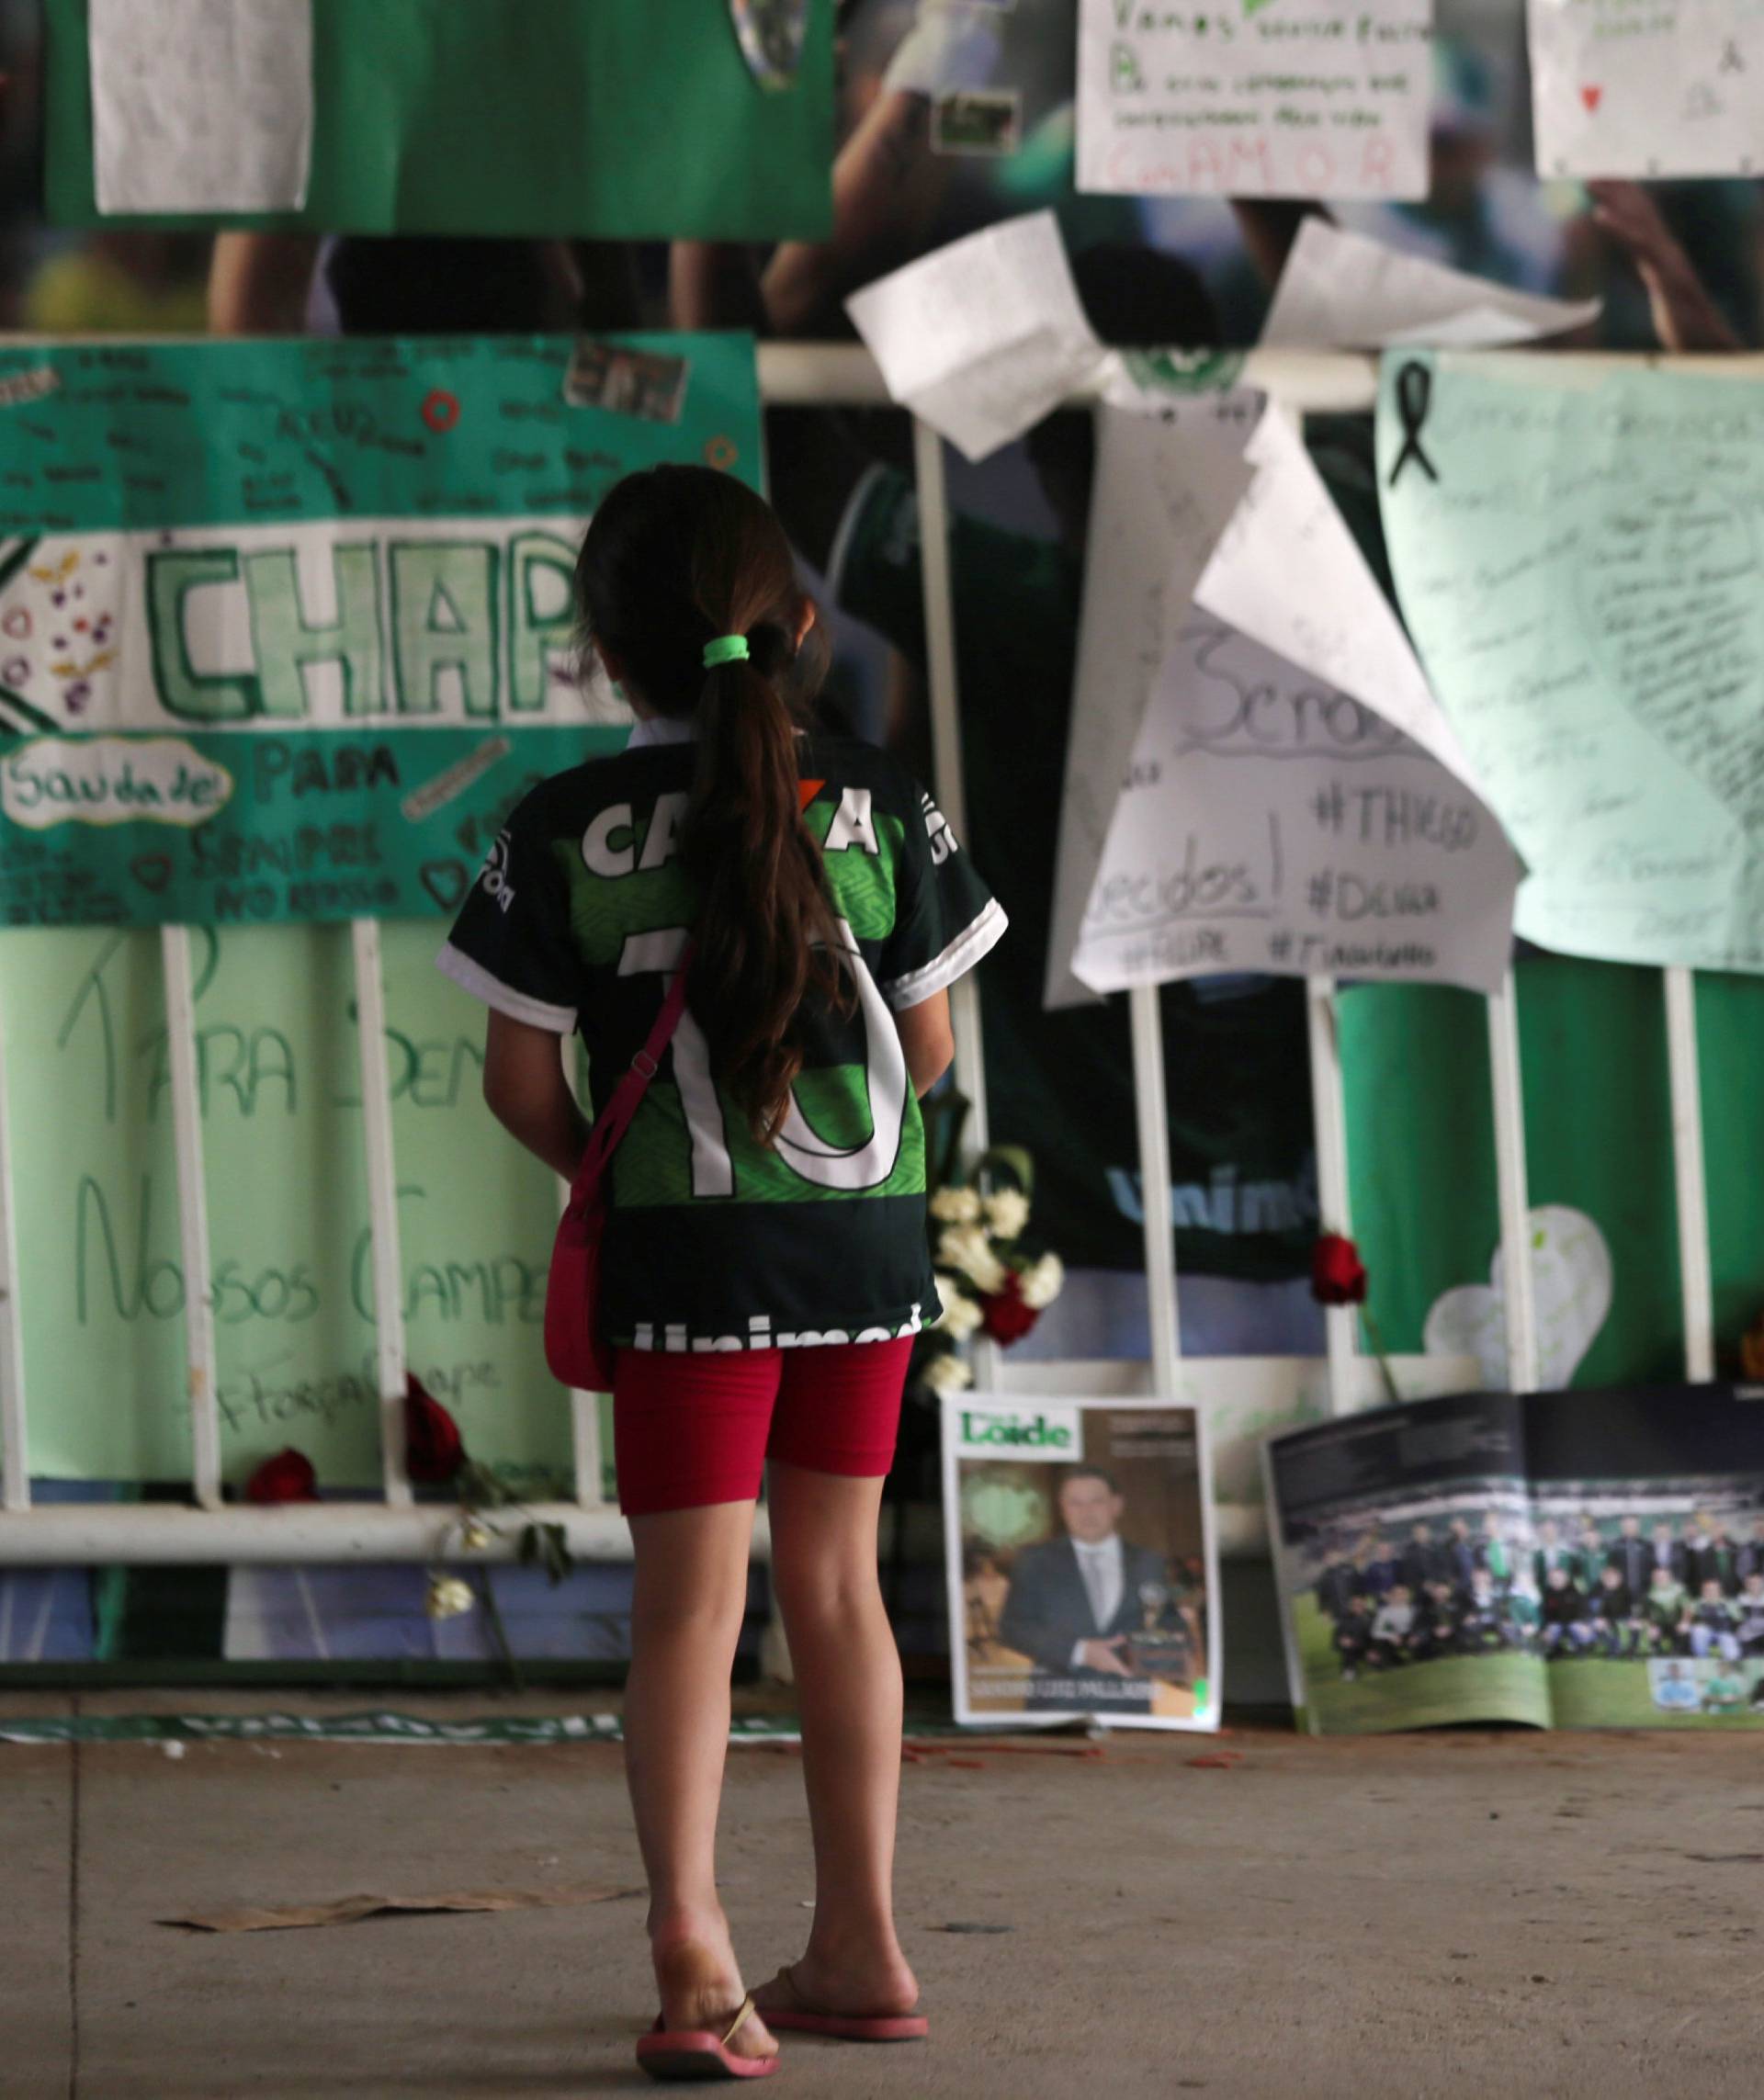 A young fan of Chapecoense soccer team pays tribute to Chapecoense's players at the Arena Conda stadium in Chapeco